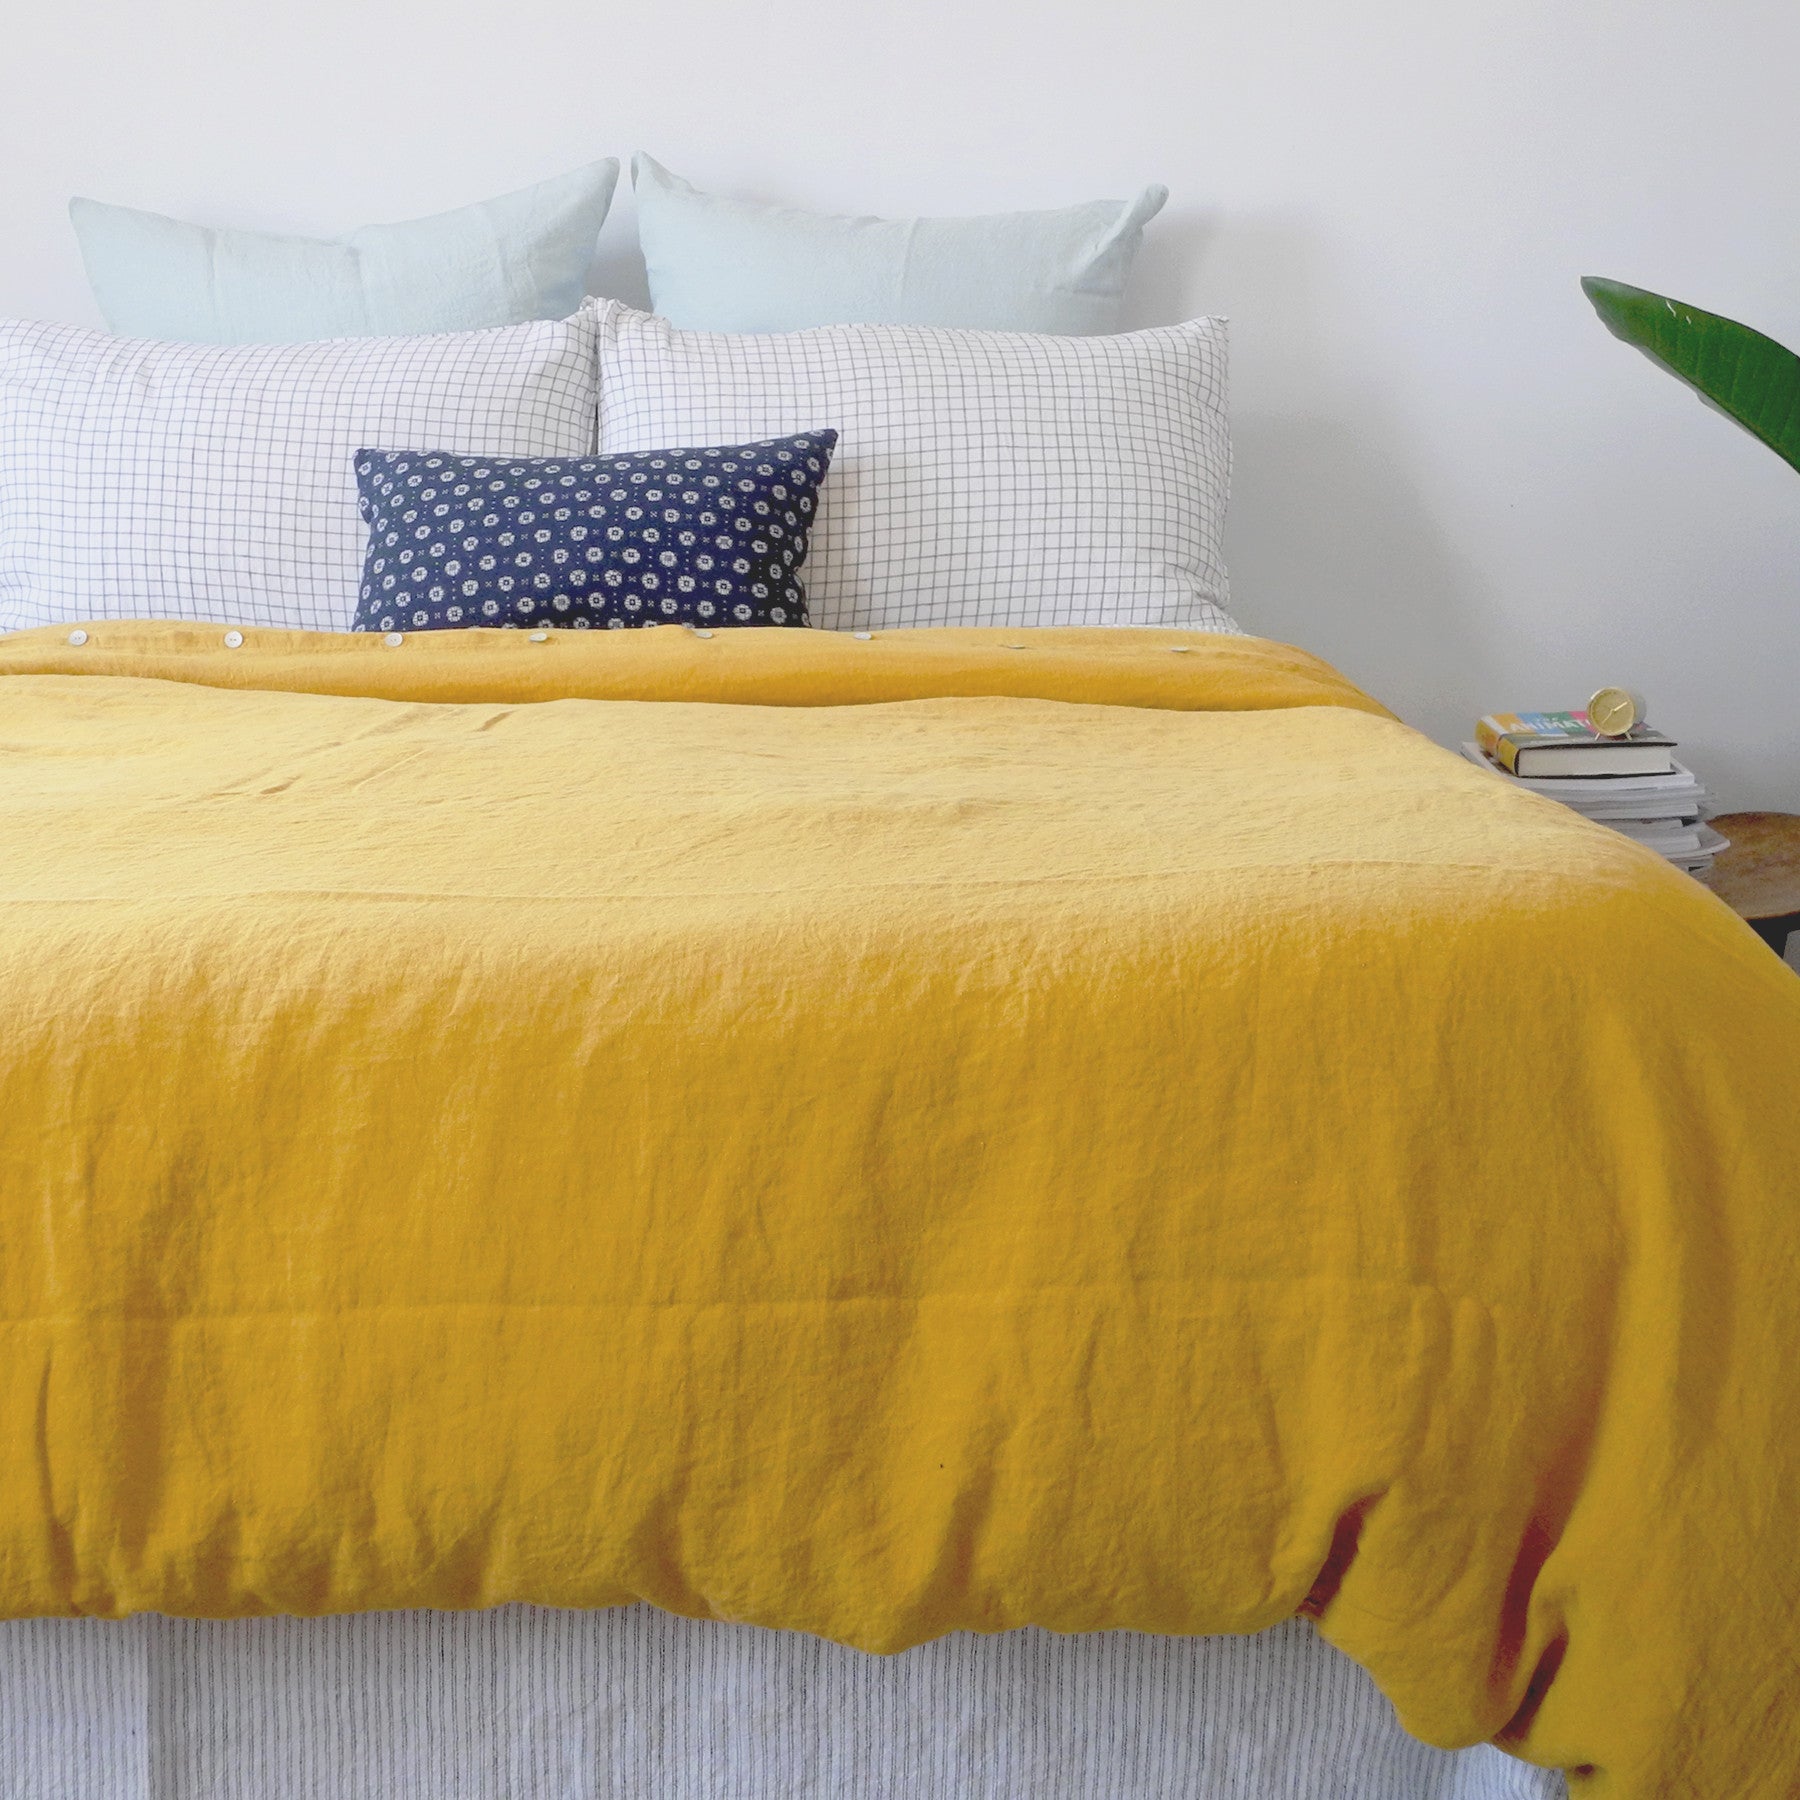 A Linge Particulier Linen Duvet in Honey gives a mustard and yellow color to this duvet for a colorful linen bedding look from Collyer's Mansion